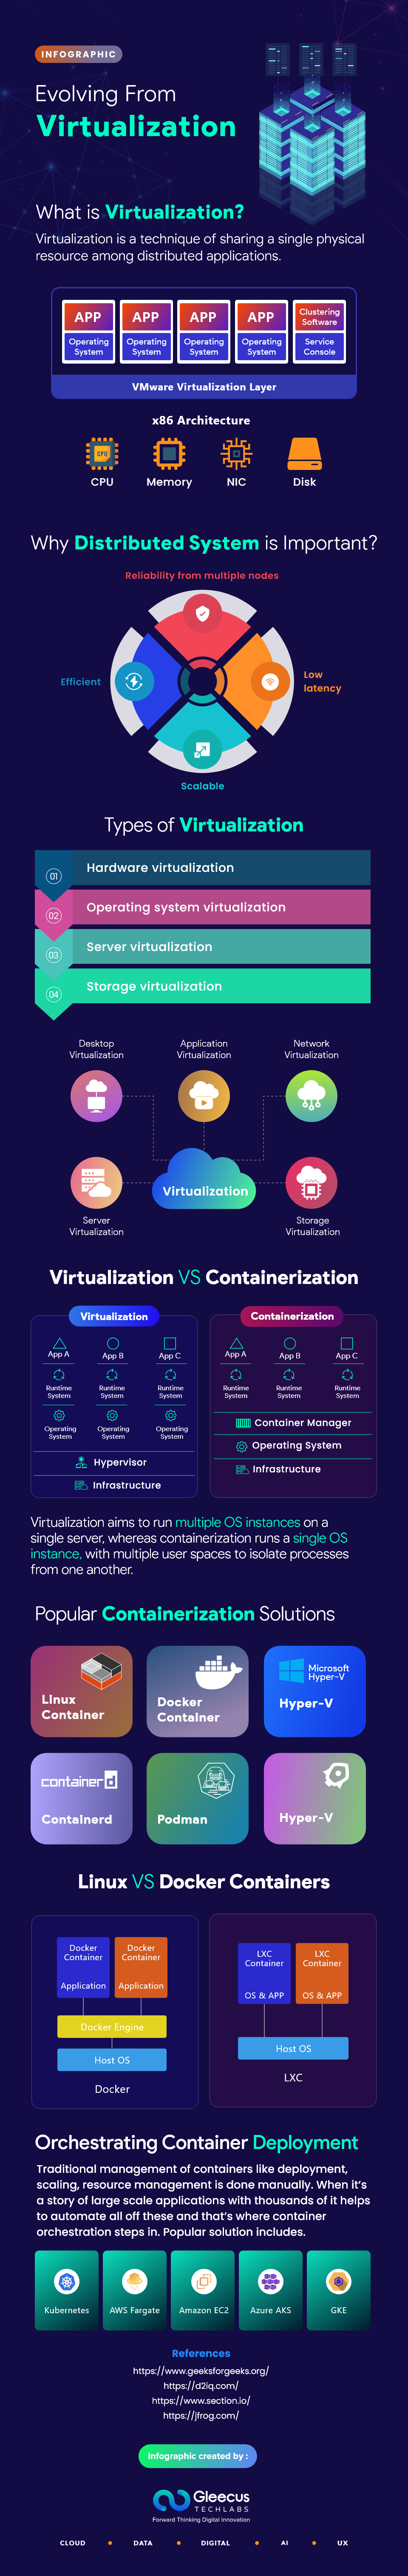 Infographics - Evolving From Virtualization